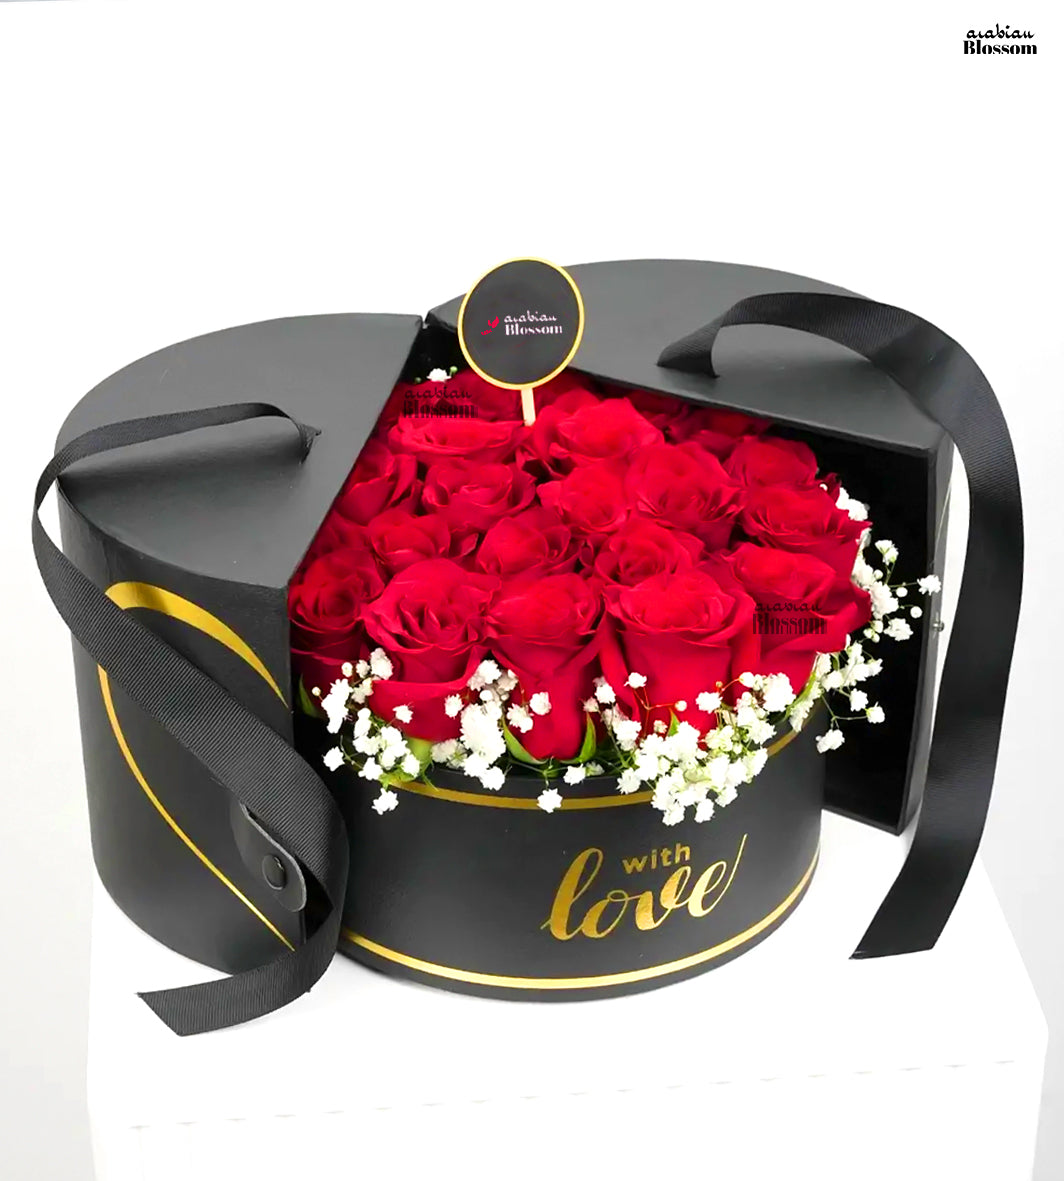 Romantic roses in a special Black Box